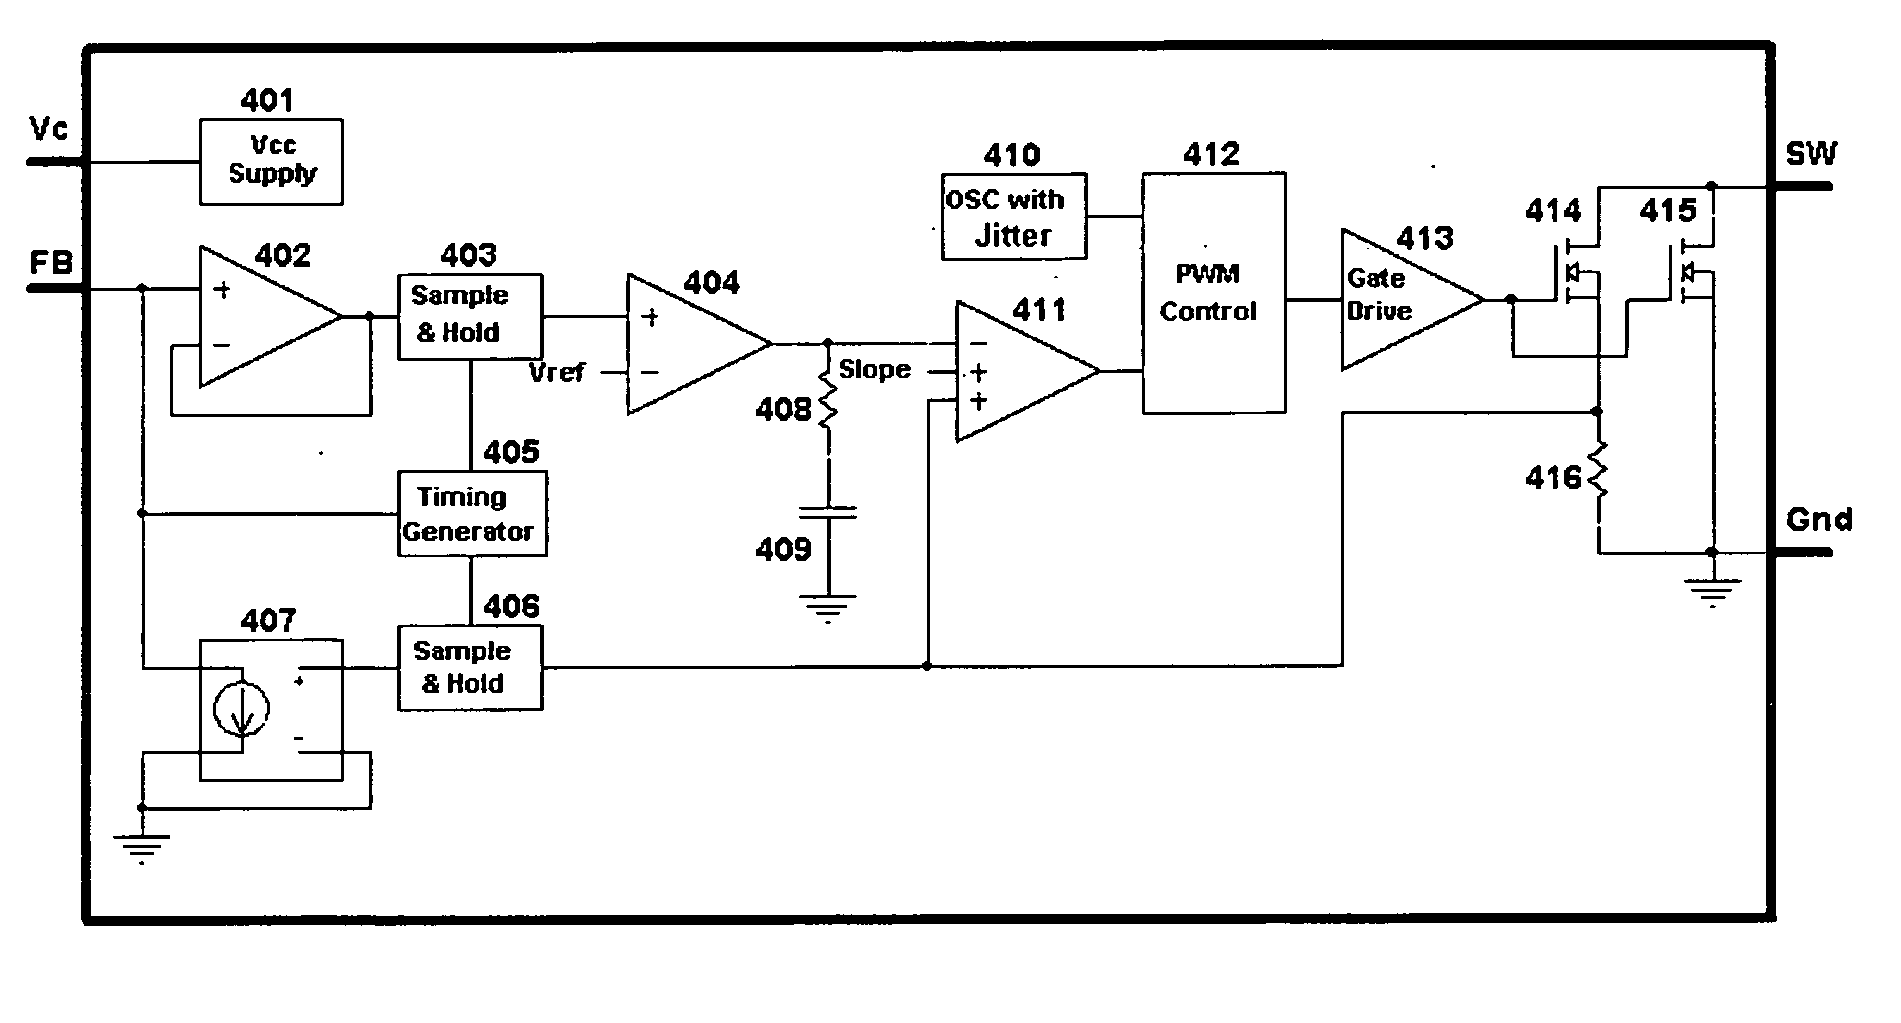 Primary side constant output voltage controller